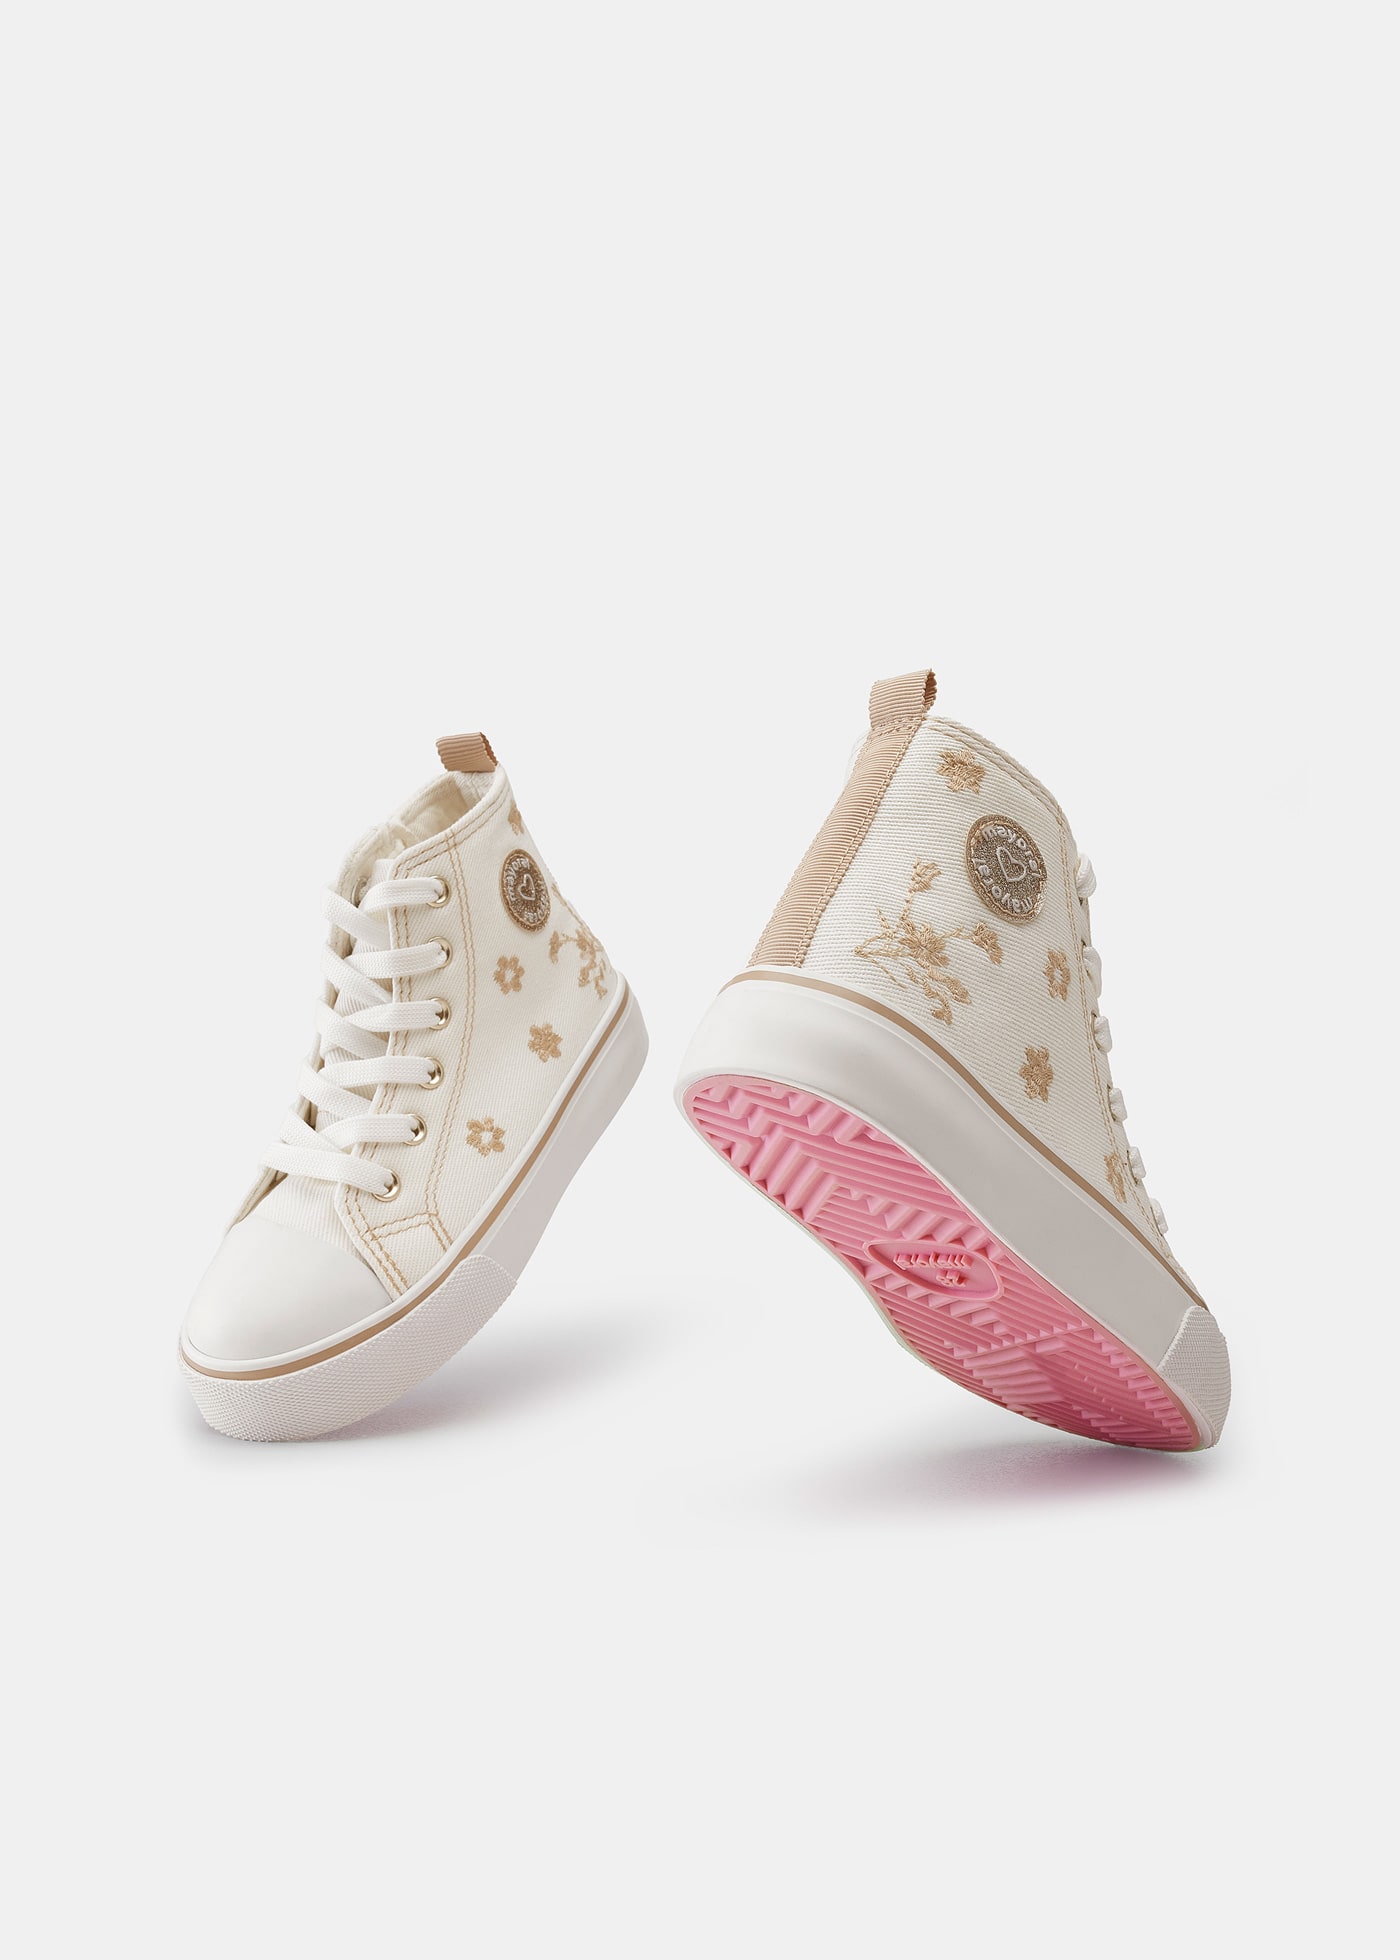 Girls embroidered sneakers